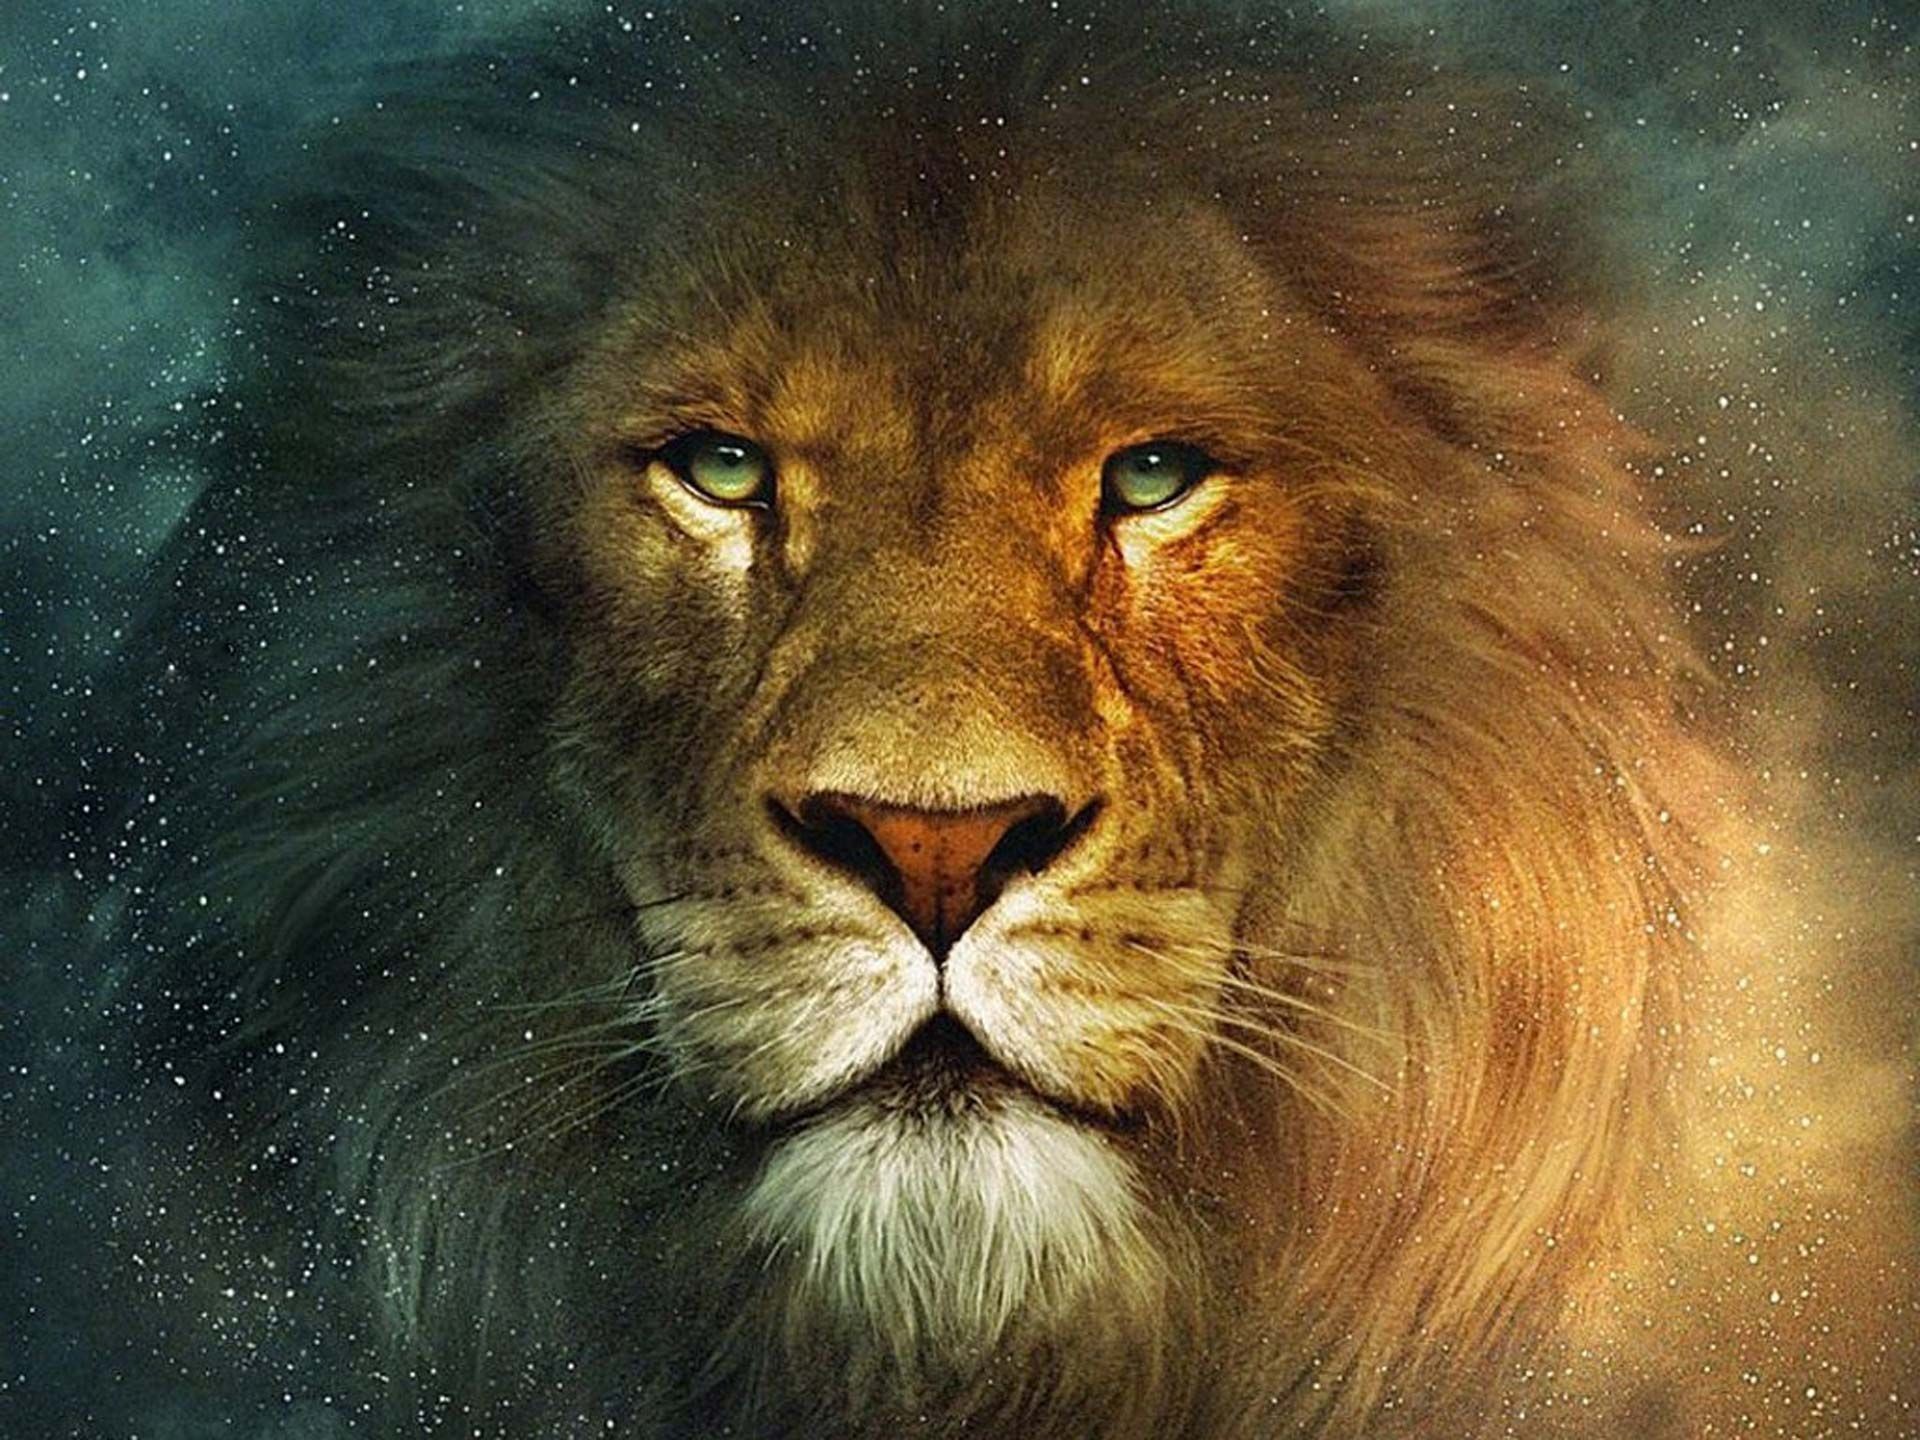 1920x1440 1920x1200 13 The Chronicles of Narnia: The Lion, the Witch and the Wardrobe  HD Wallpapers | Background Images - Wallpaper Abyss